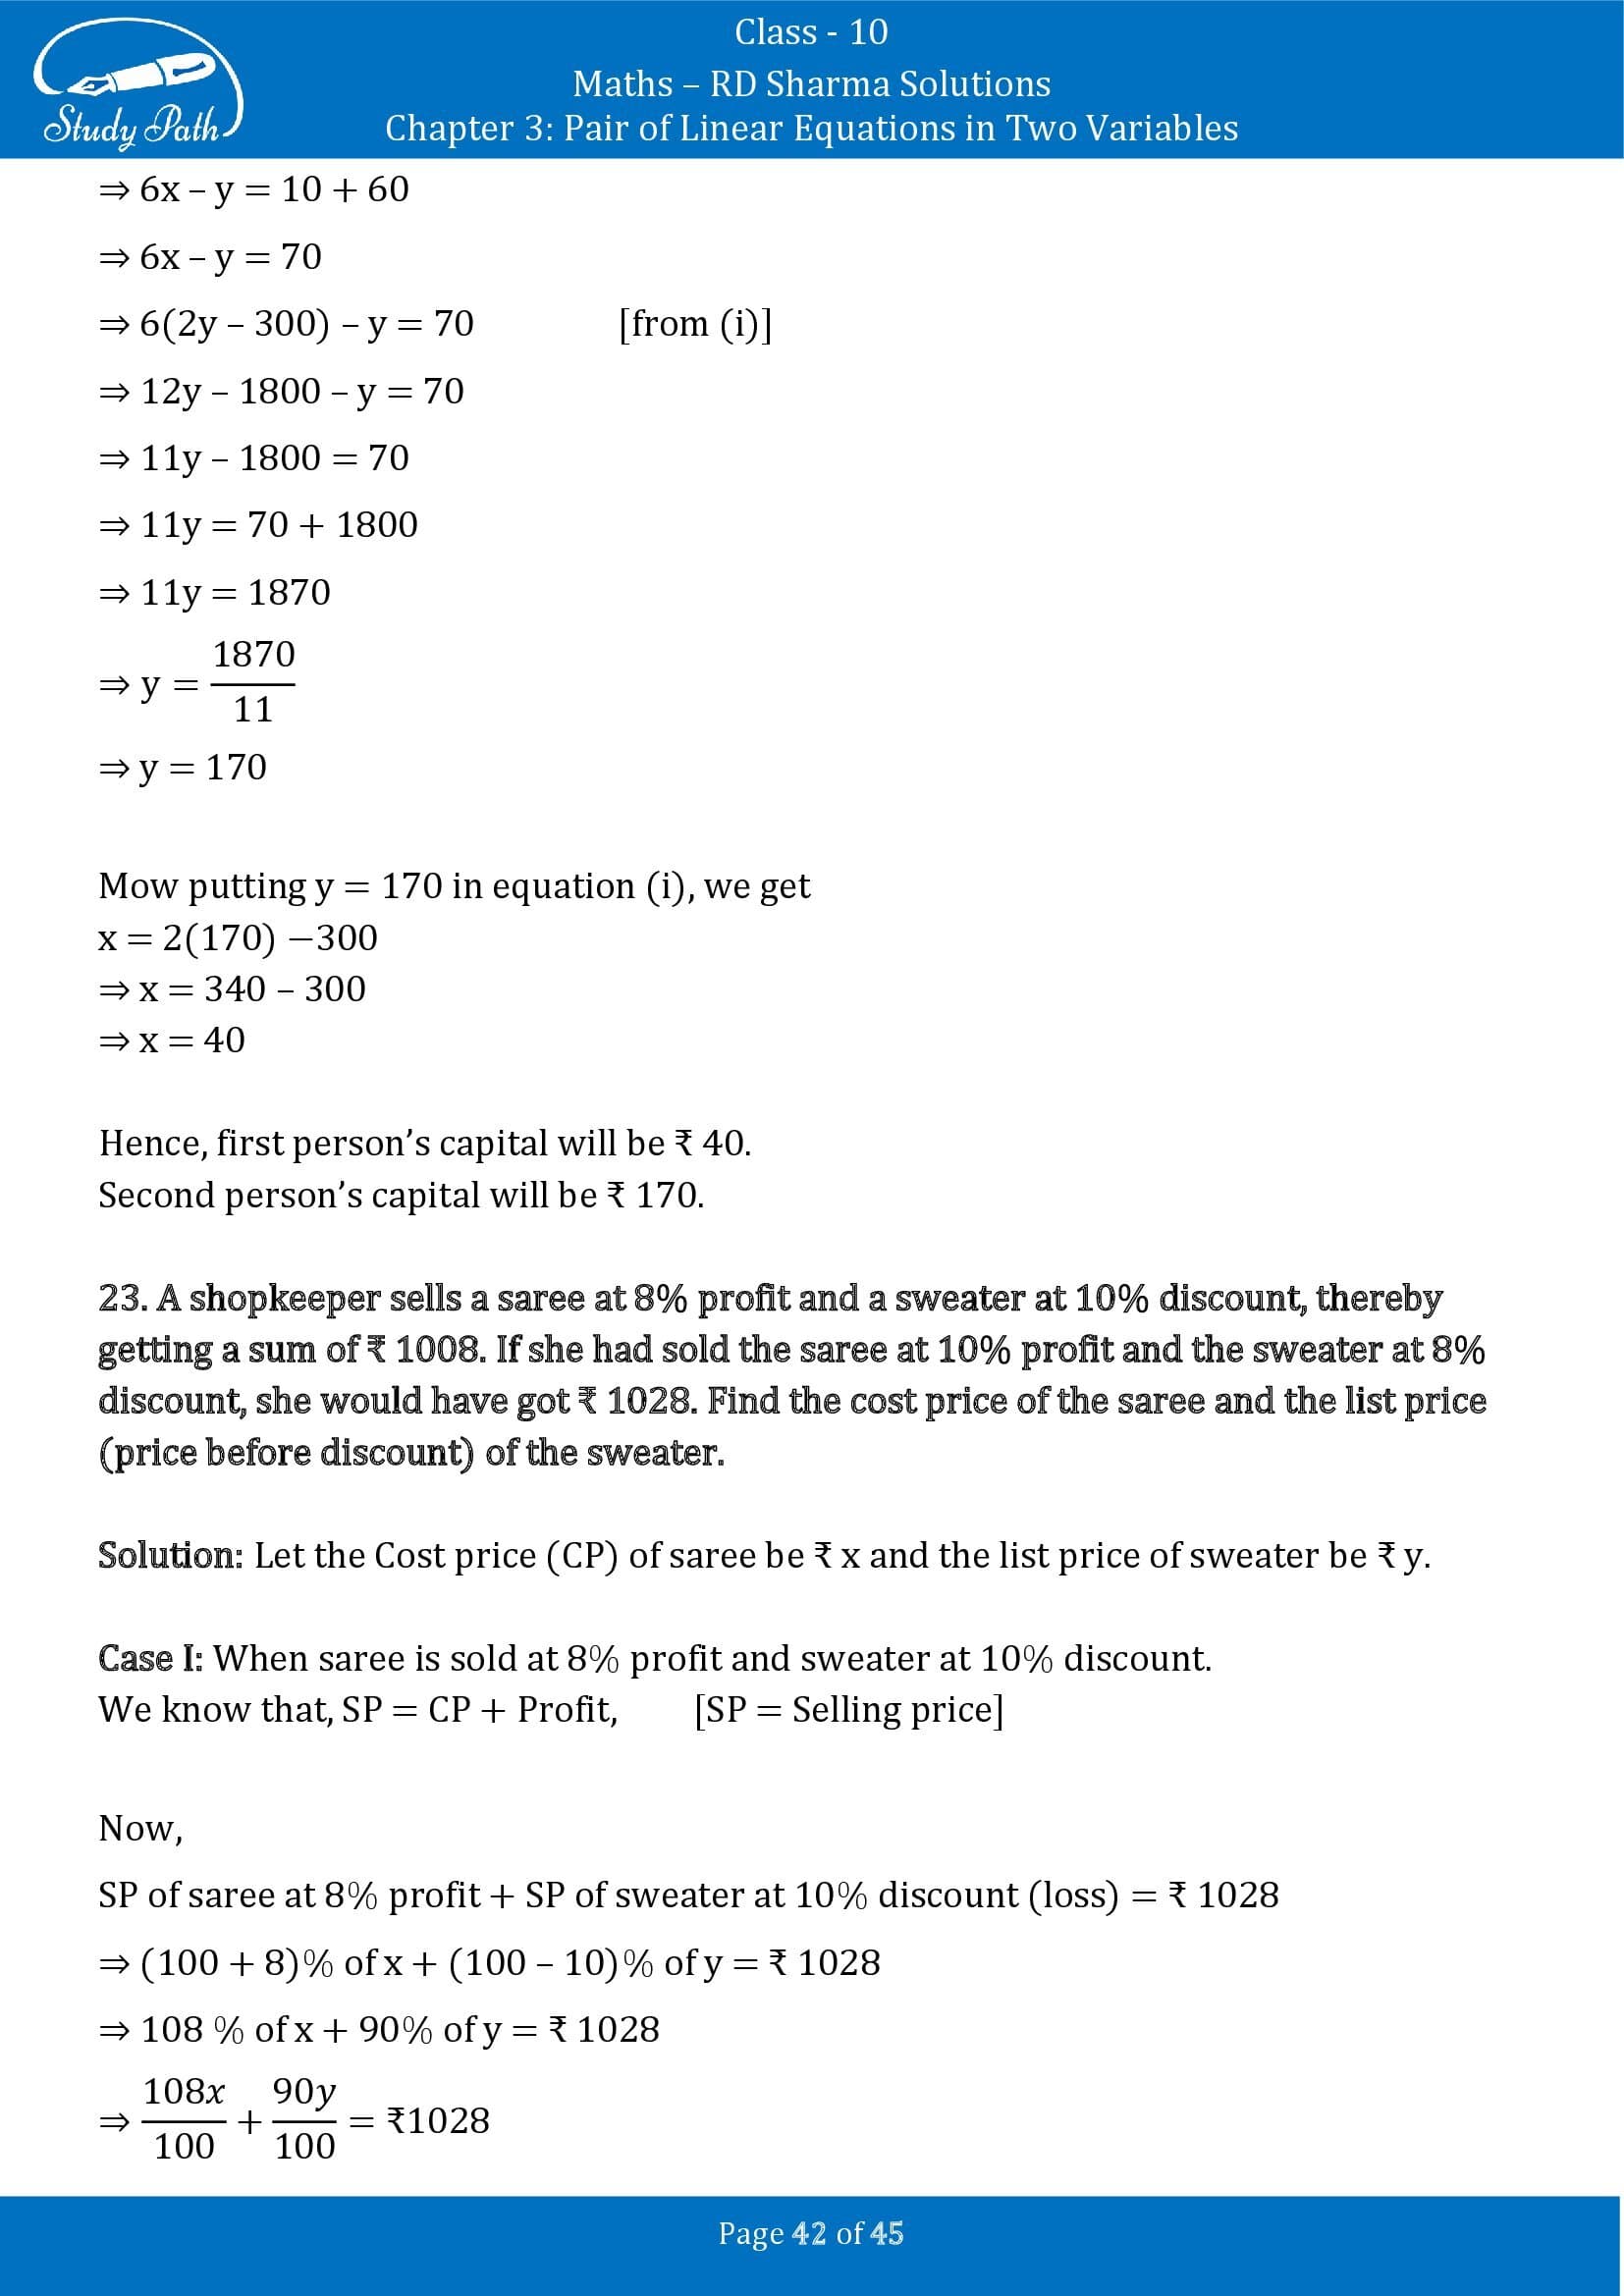 RD Sharma Solutions Class 10 Chapter 3 Pair of Linear Equations in Two Variables Exercise 3.11 00042